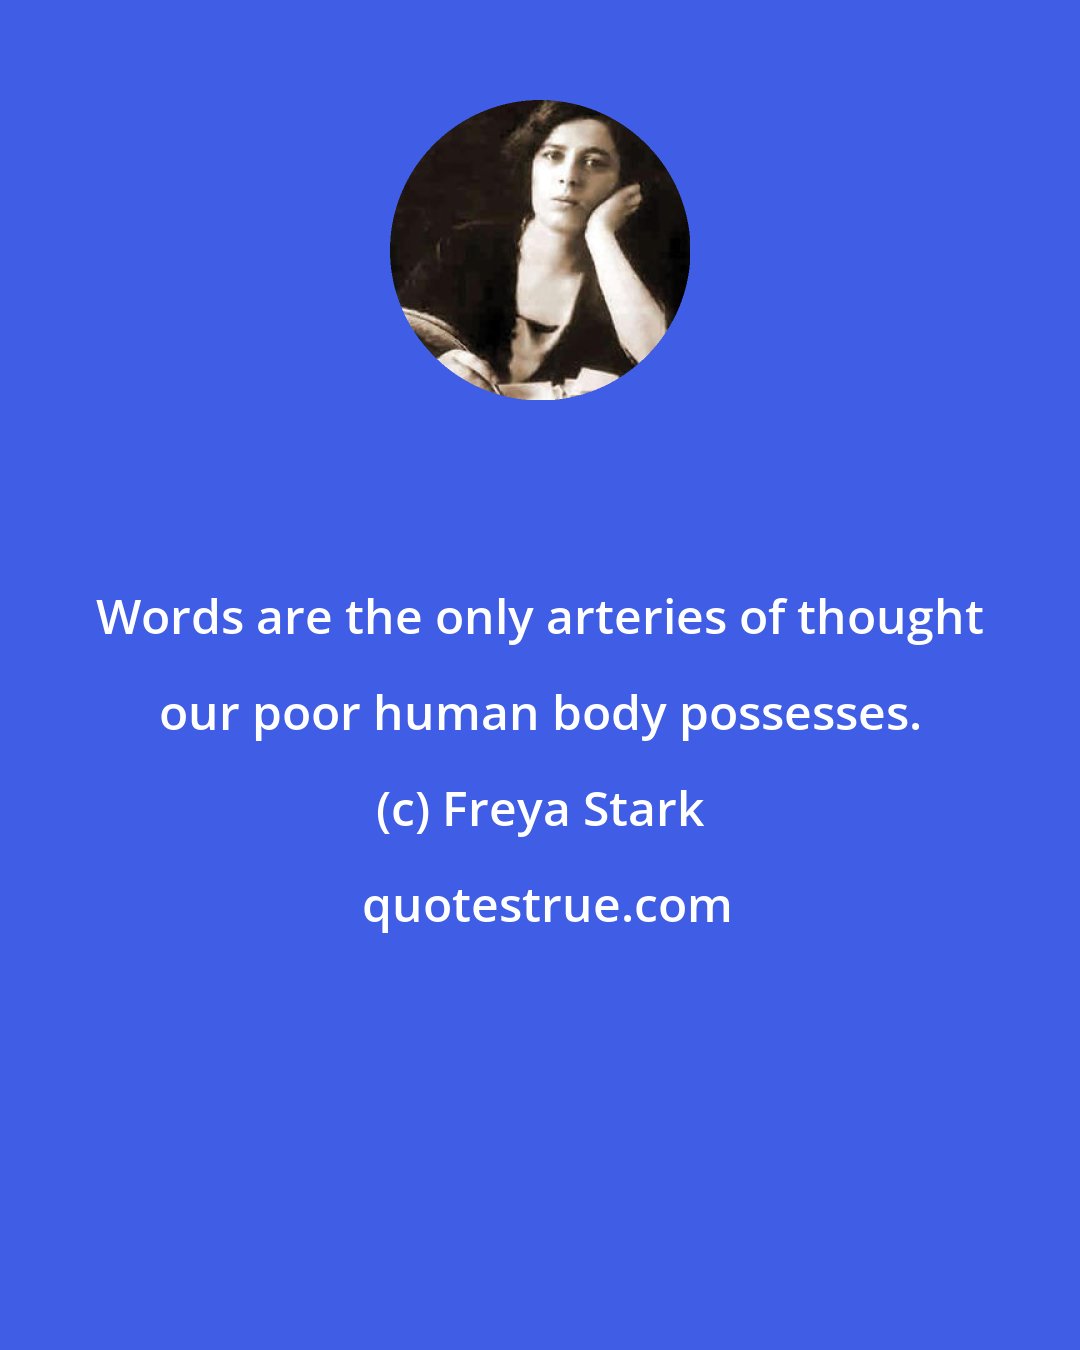 Freya Stark: Words are the only arteries of thought our poor human body possesses.